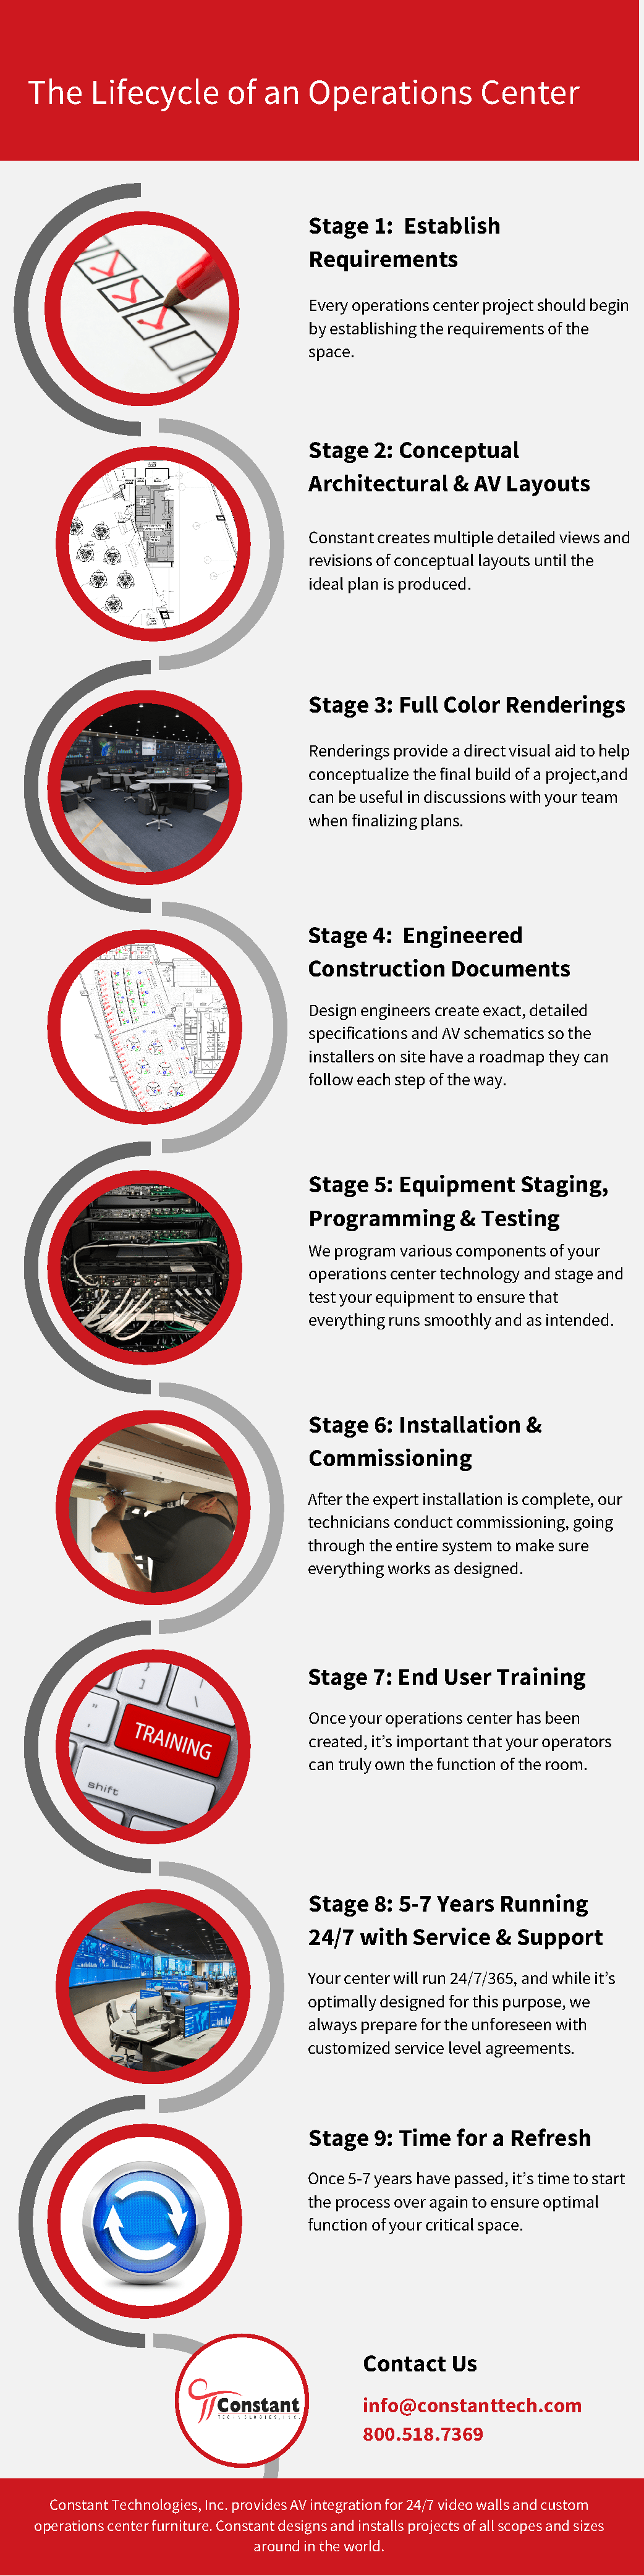 Infographic detailing the stages of an operations center lifecycle.